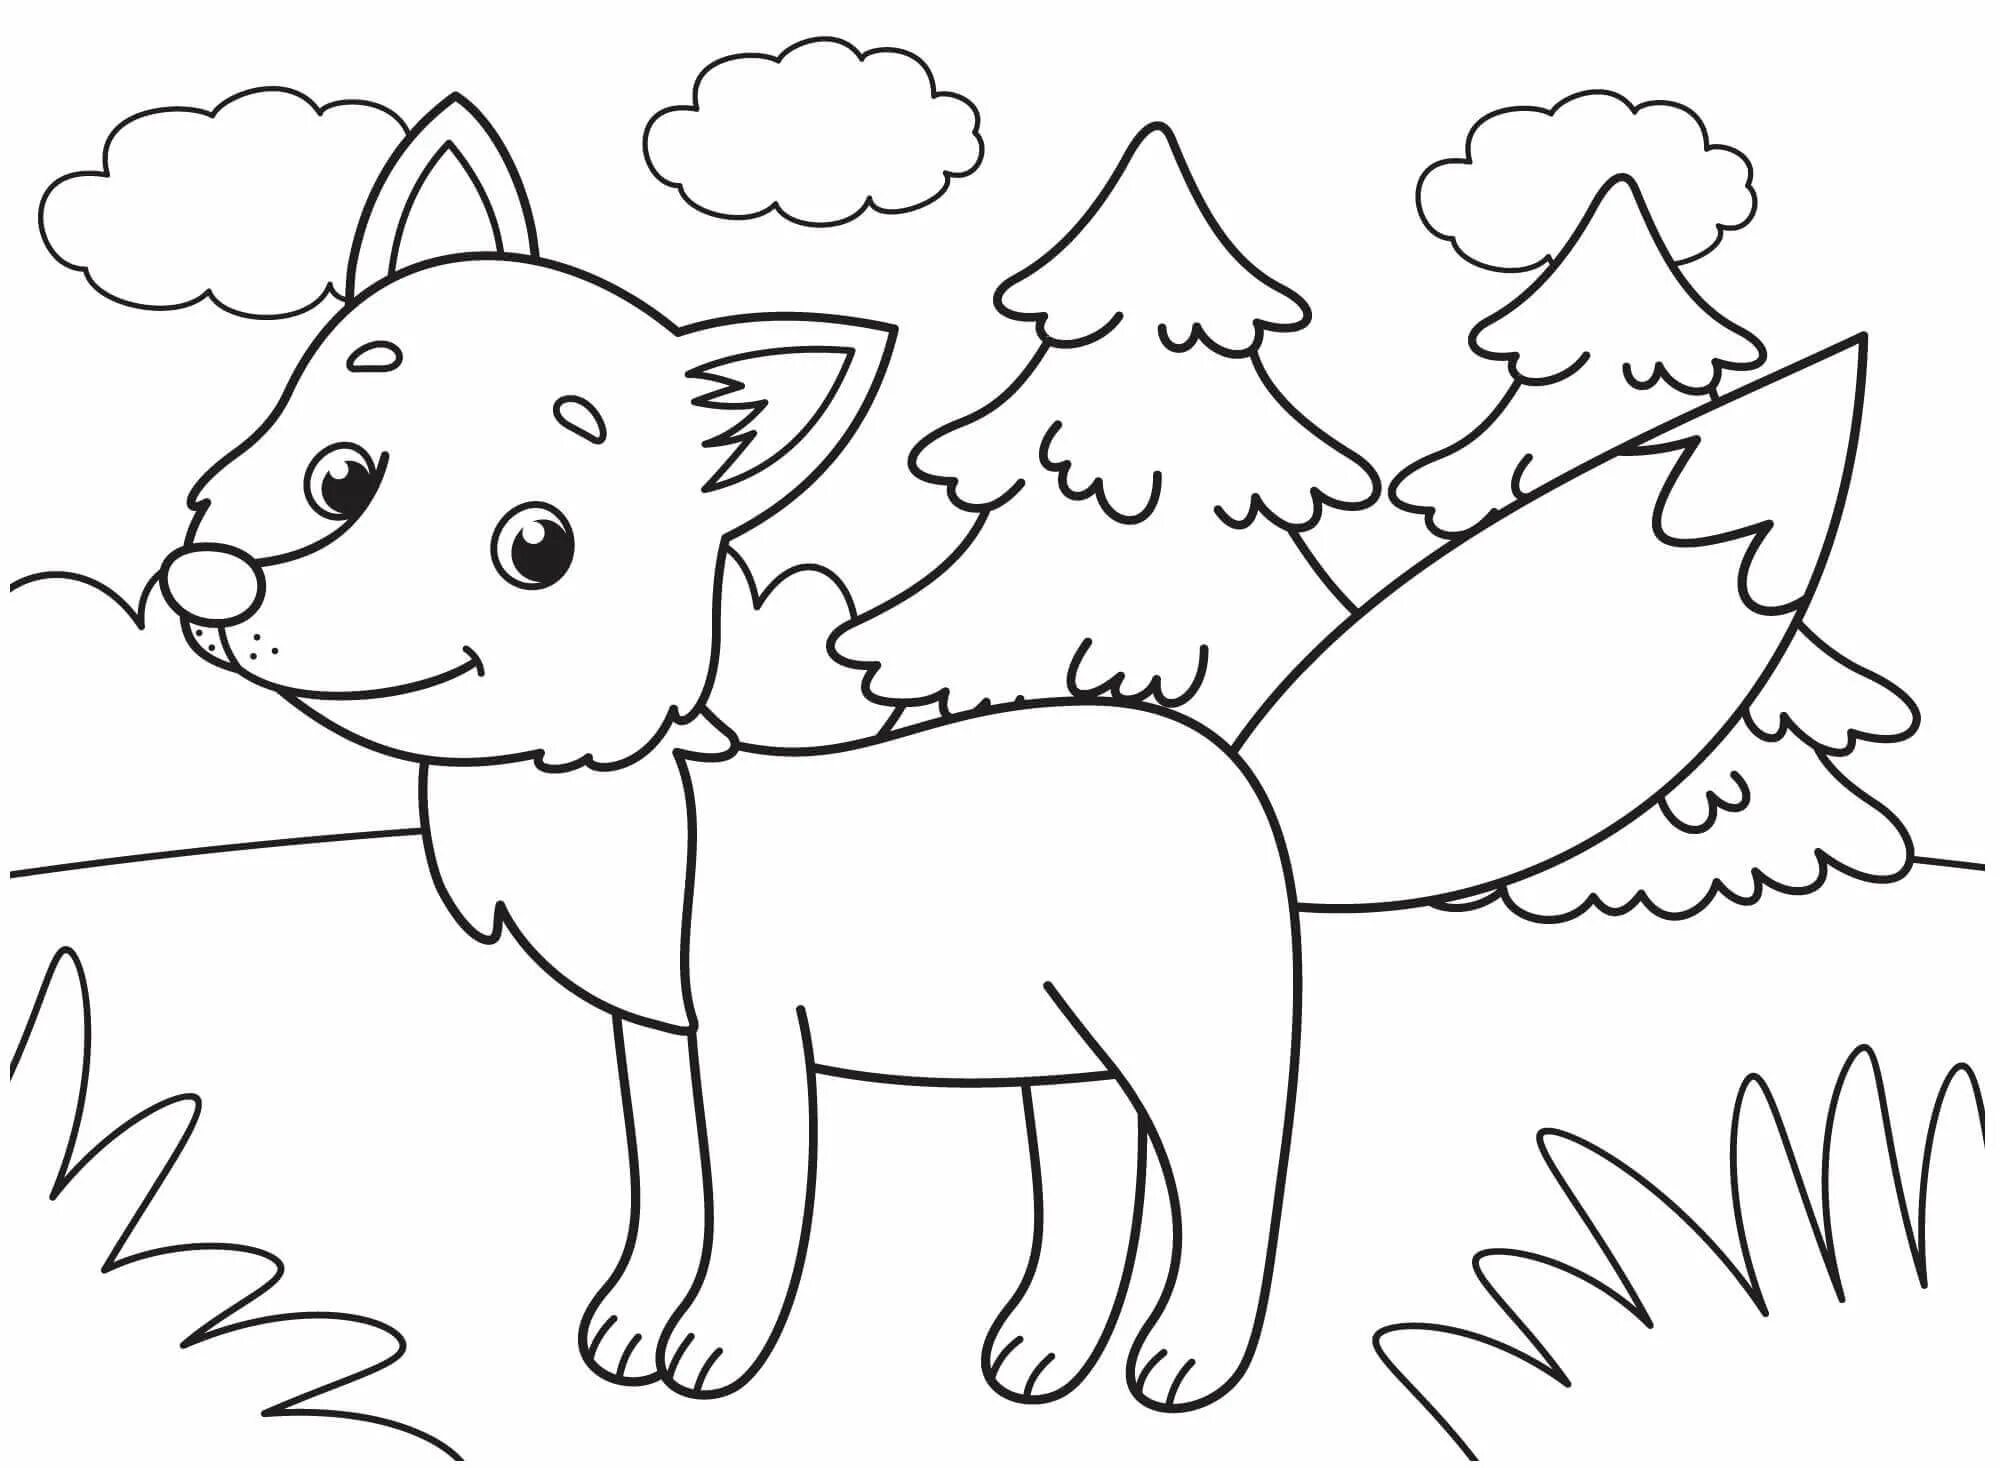 Splendid fox coloring book for children 2-3 years old